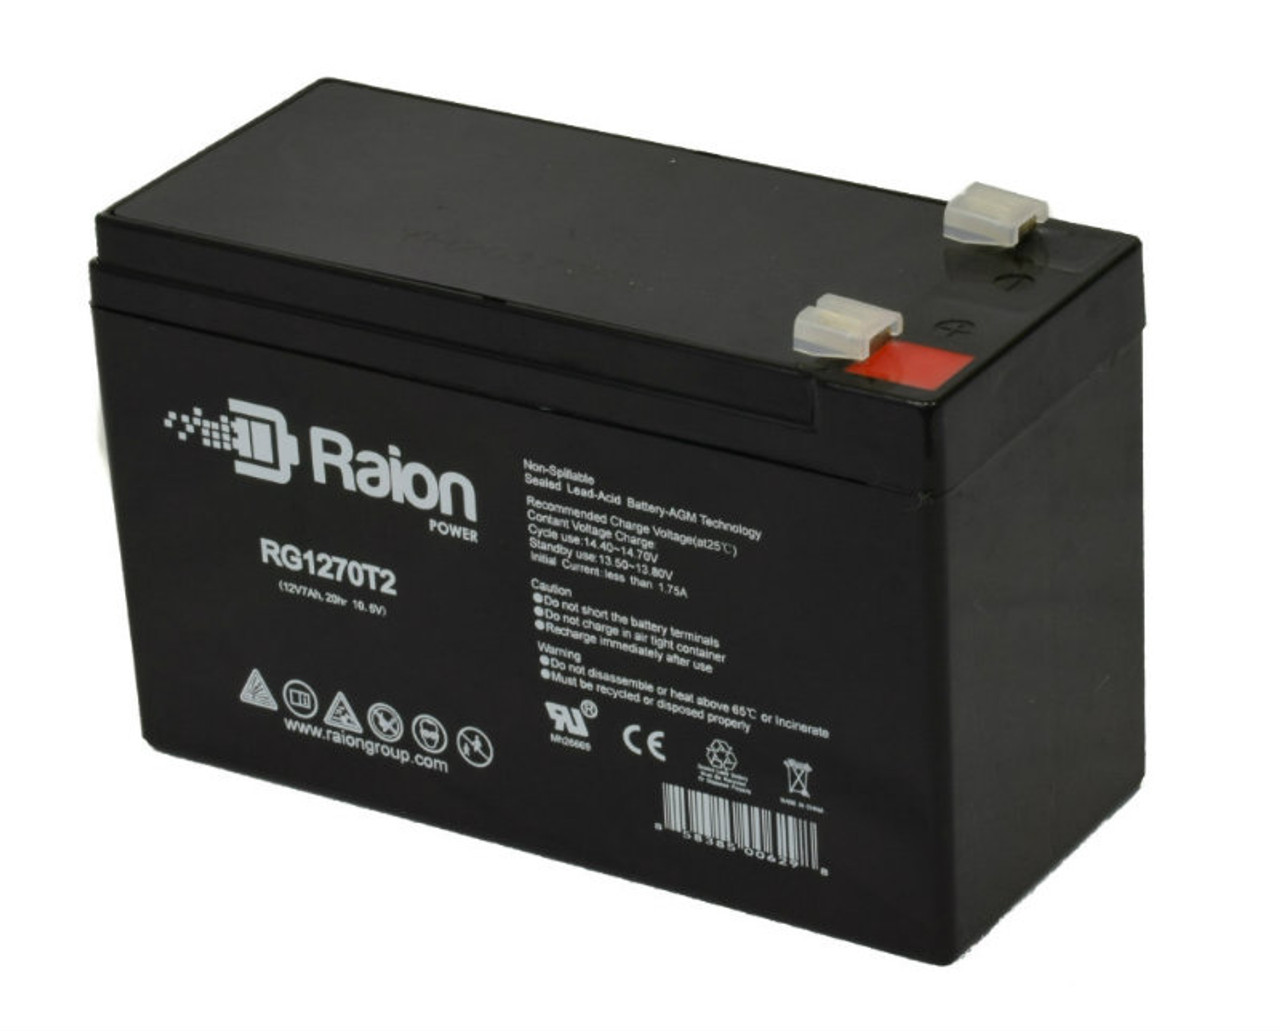 Raion Power Replacement 12V 7Ah Battery for Humminbird Piranha Fish Finder - 1 Pack